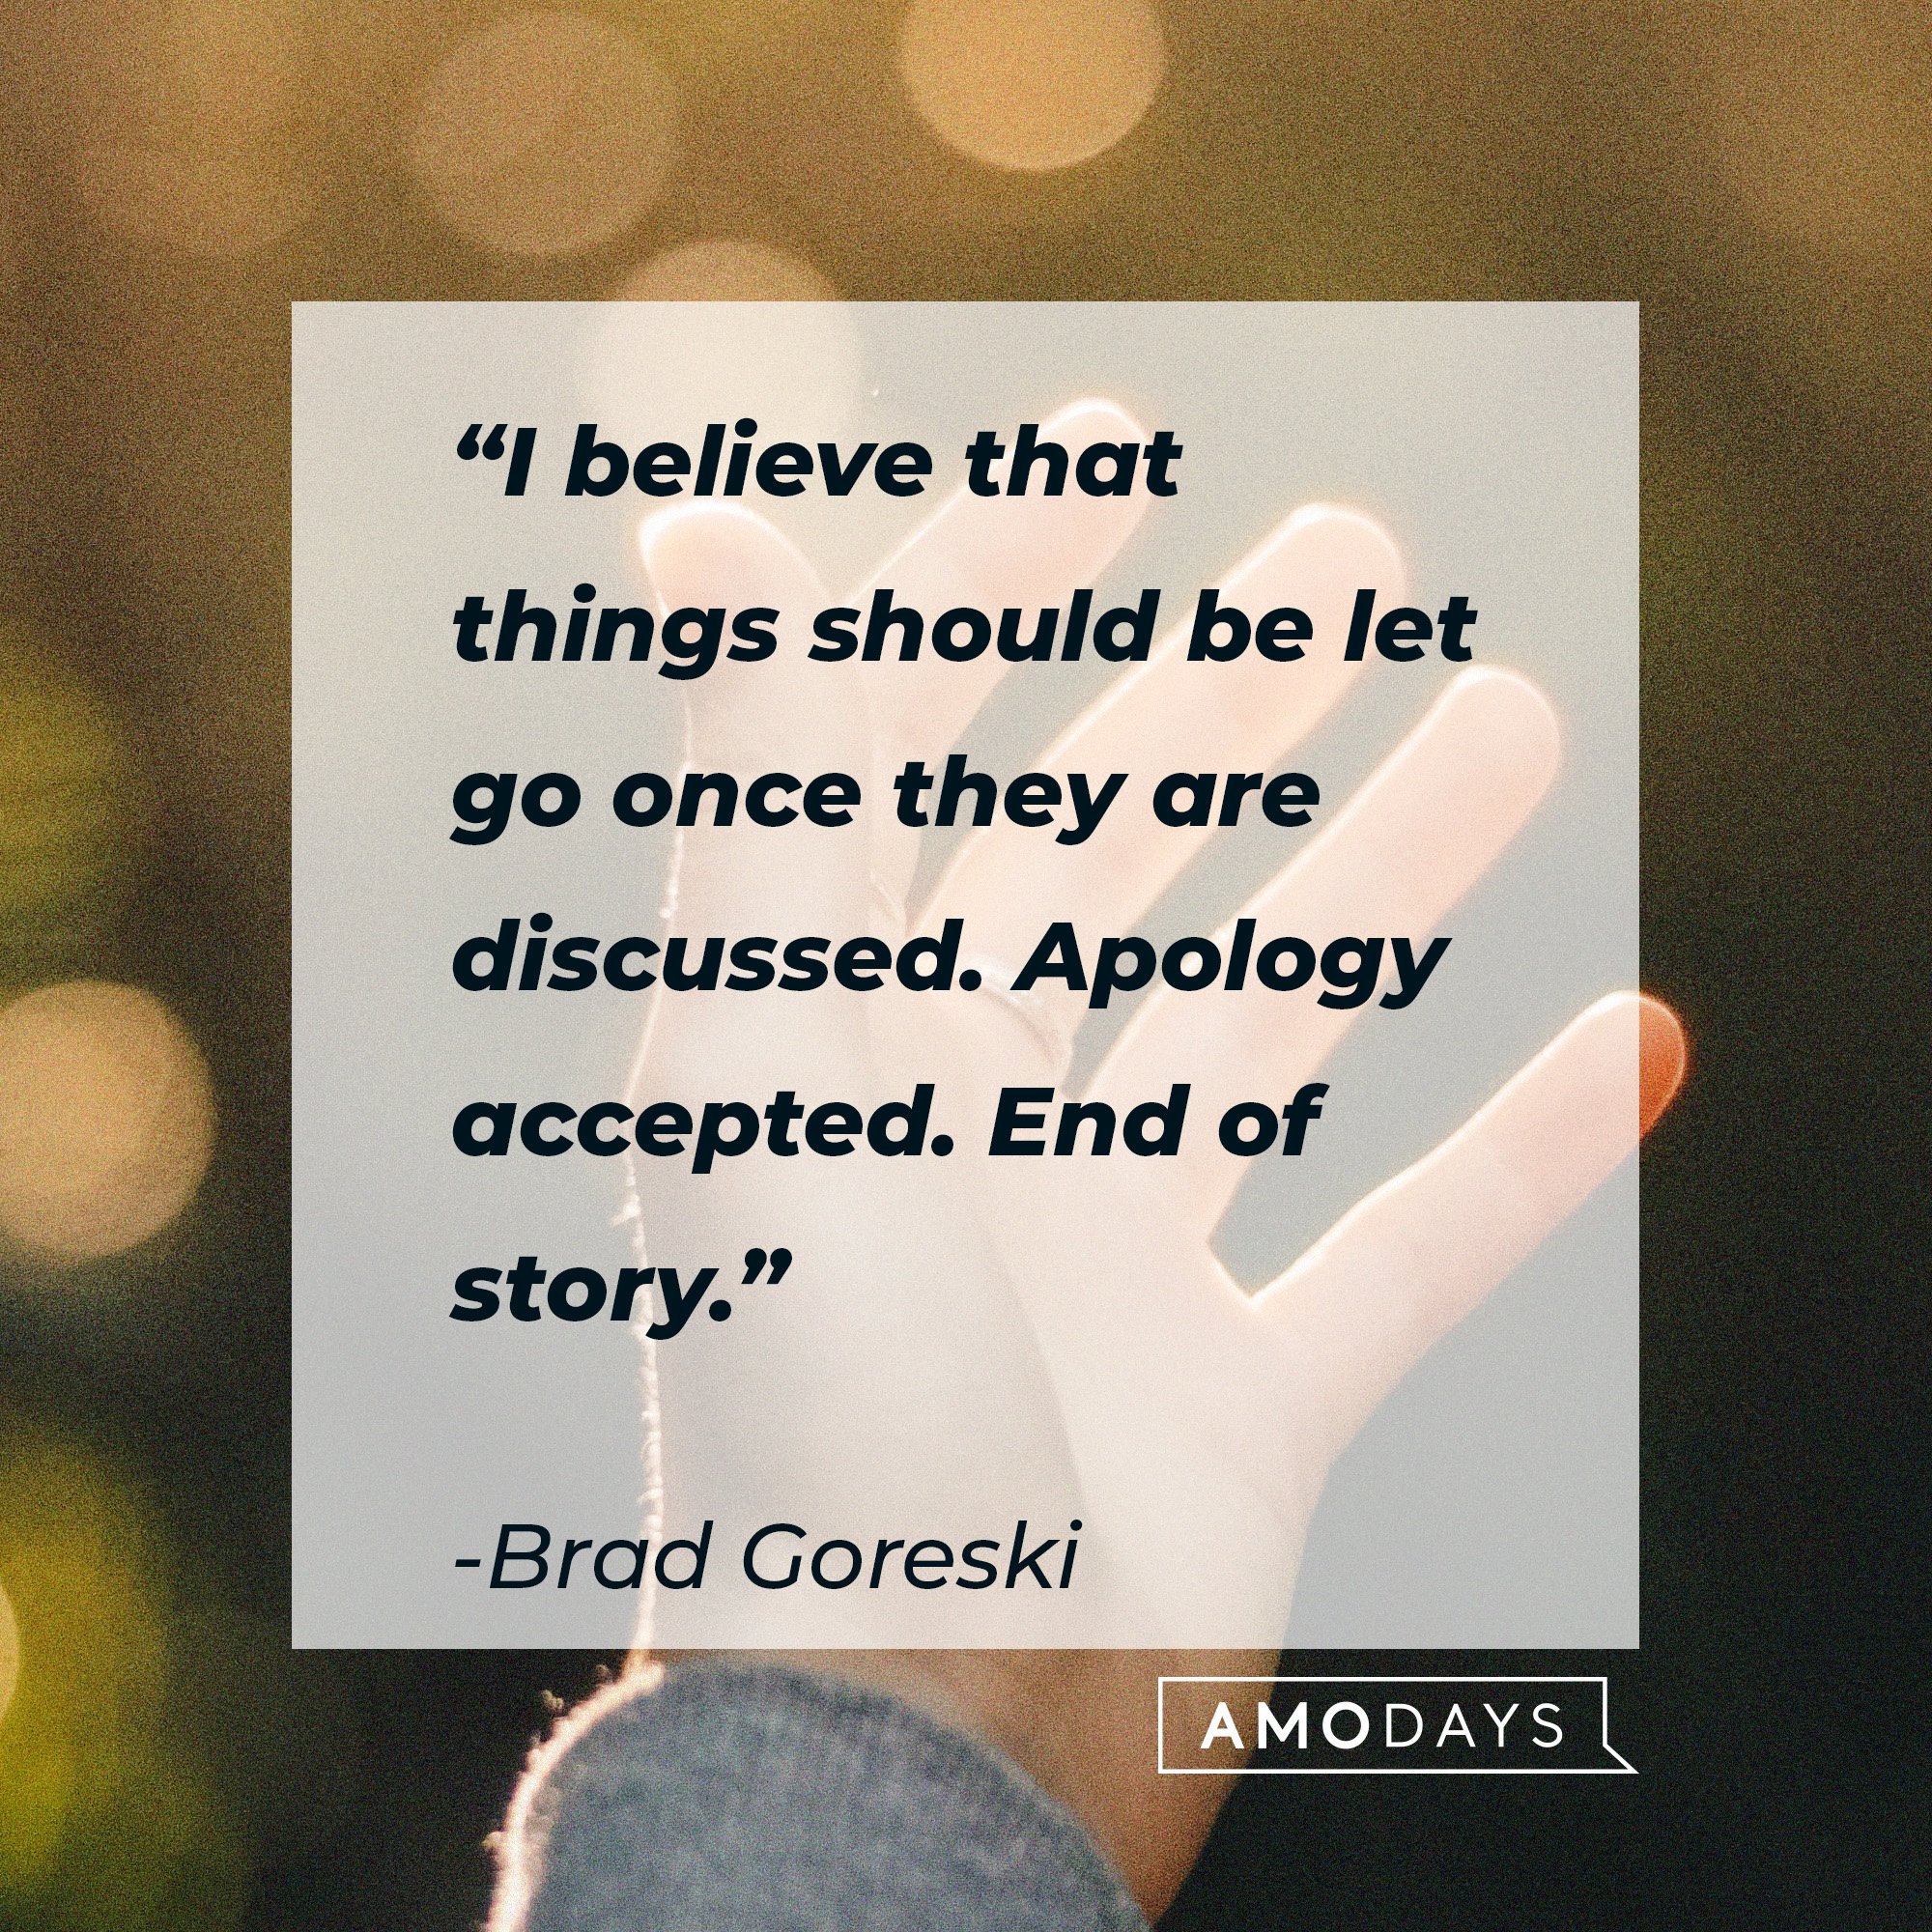 Brad Goreski's quote: "I believe that things should be let go once they are discussed. Apology accepted. End of story.” | Image: AmoDays